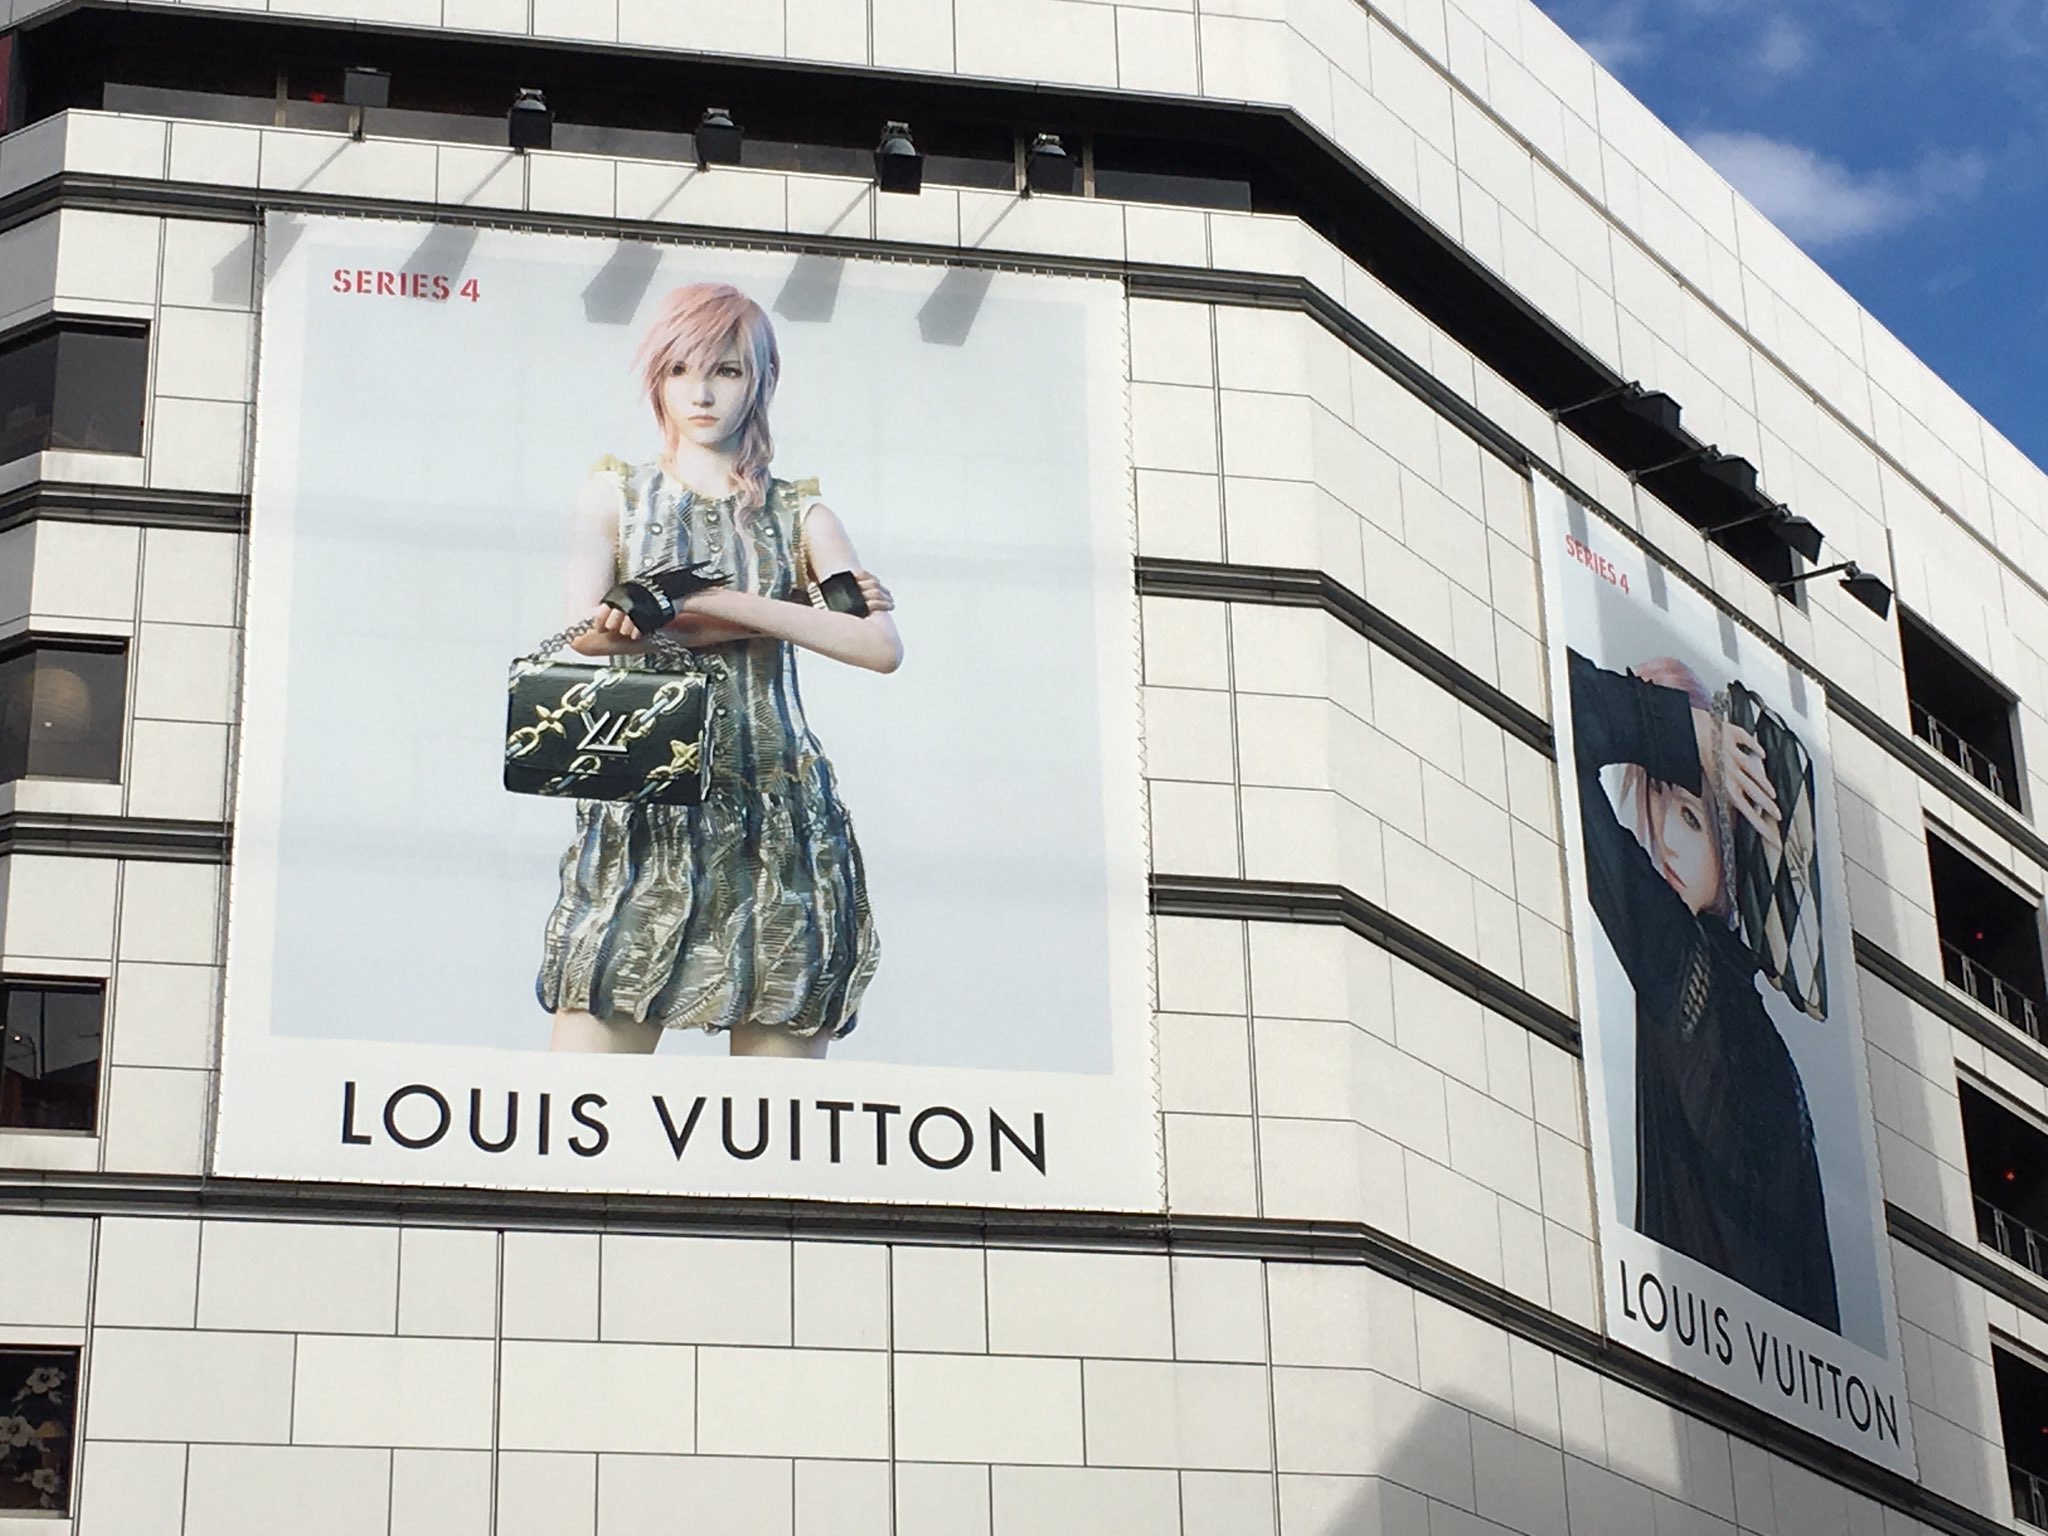 Louis Vuitton's 2016 collection, as modeled by 'Final Fantasy